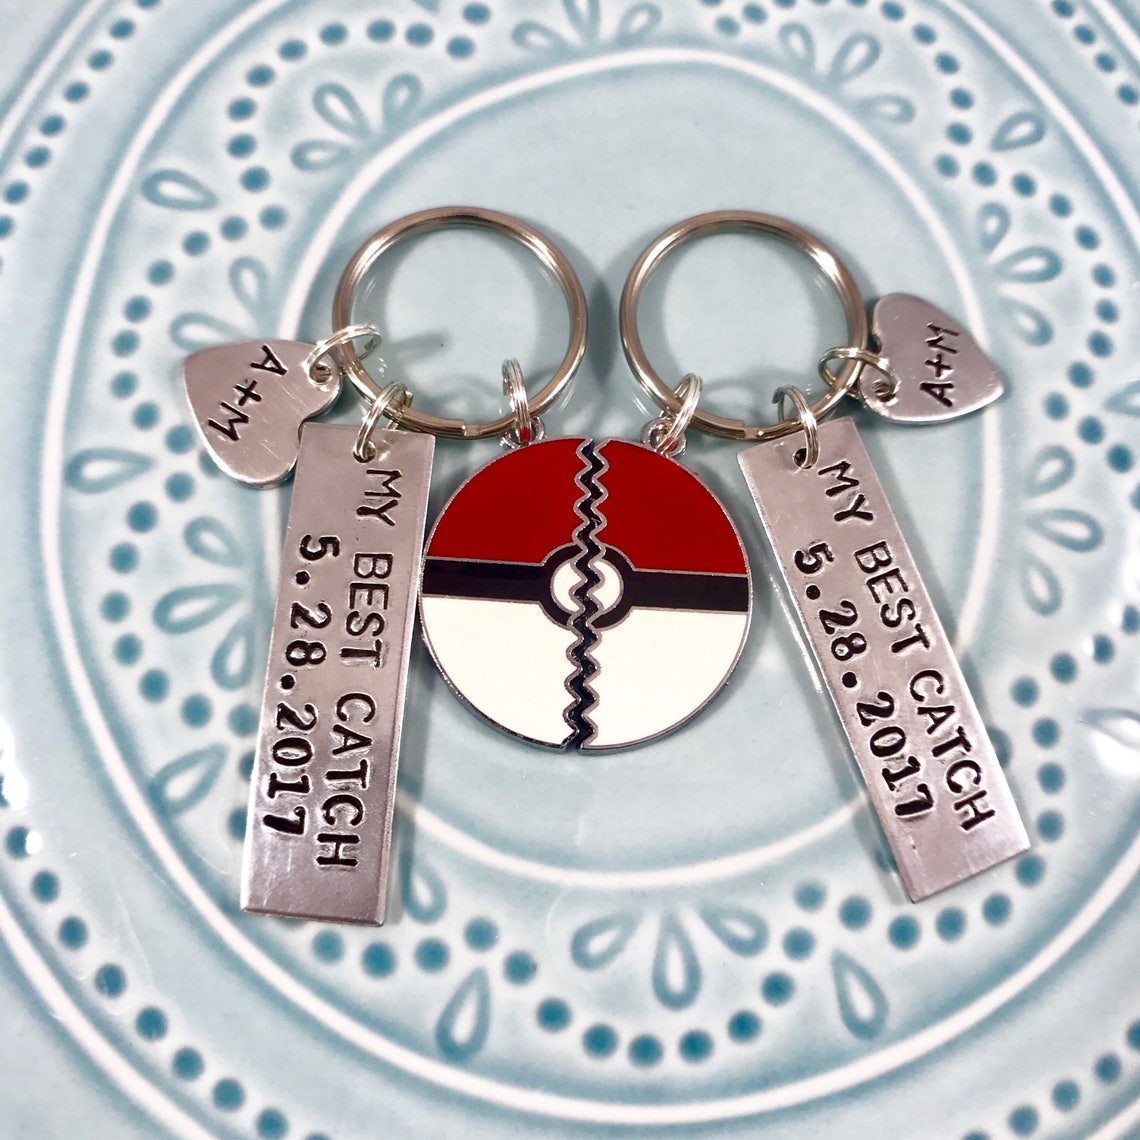 Personalized Couples Anime Keychain Set Valentine's Day Gift